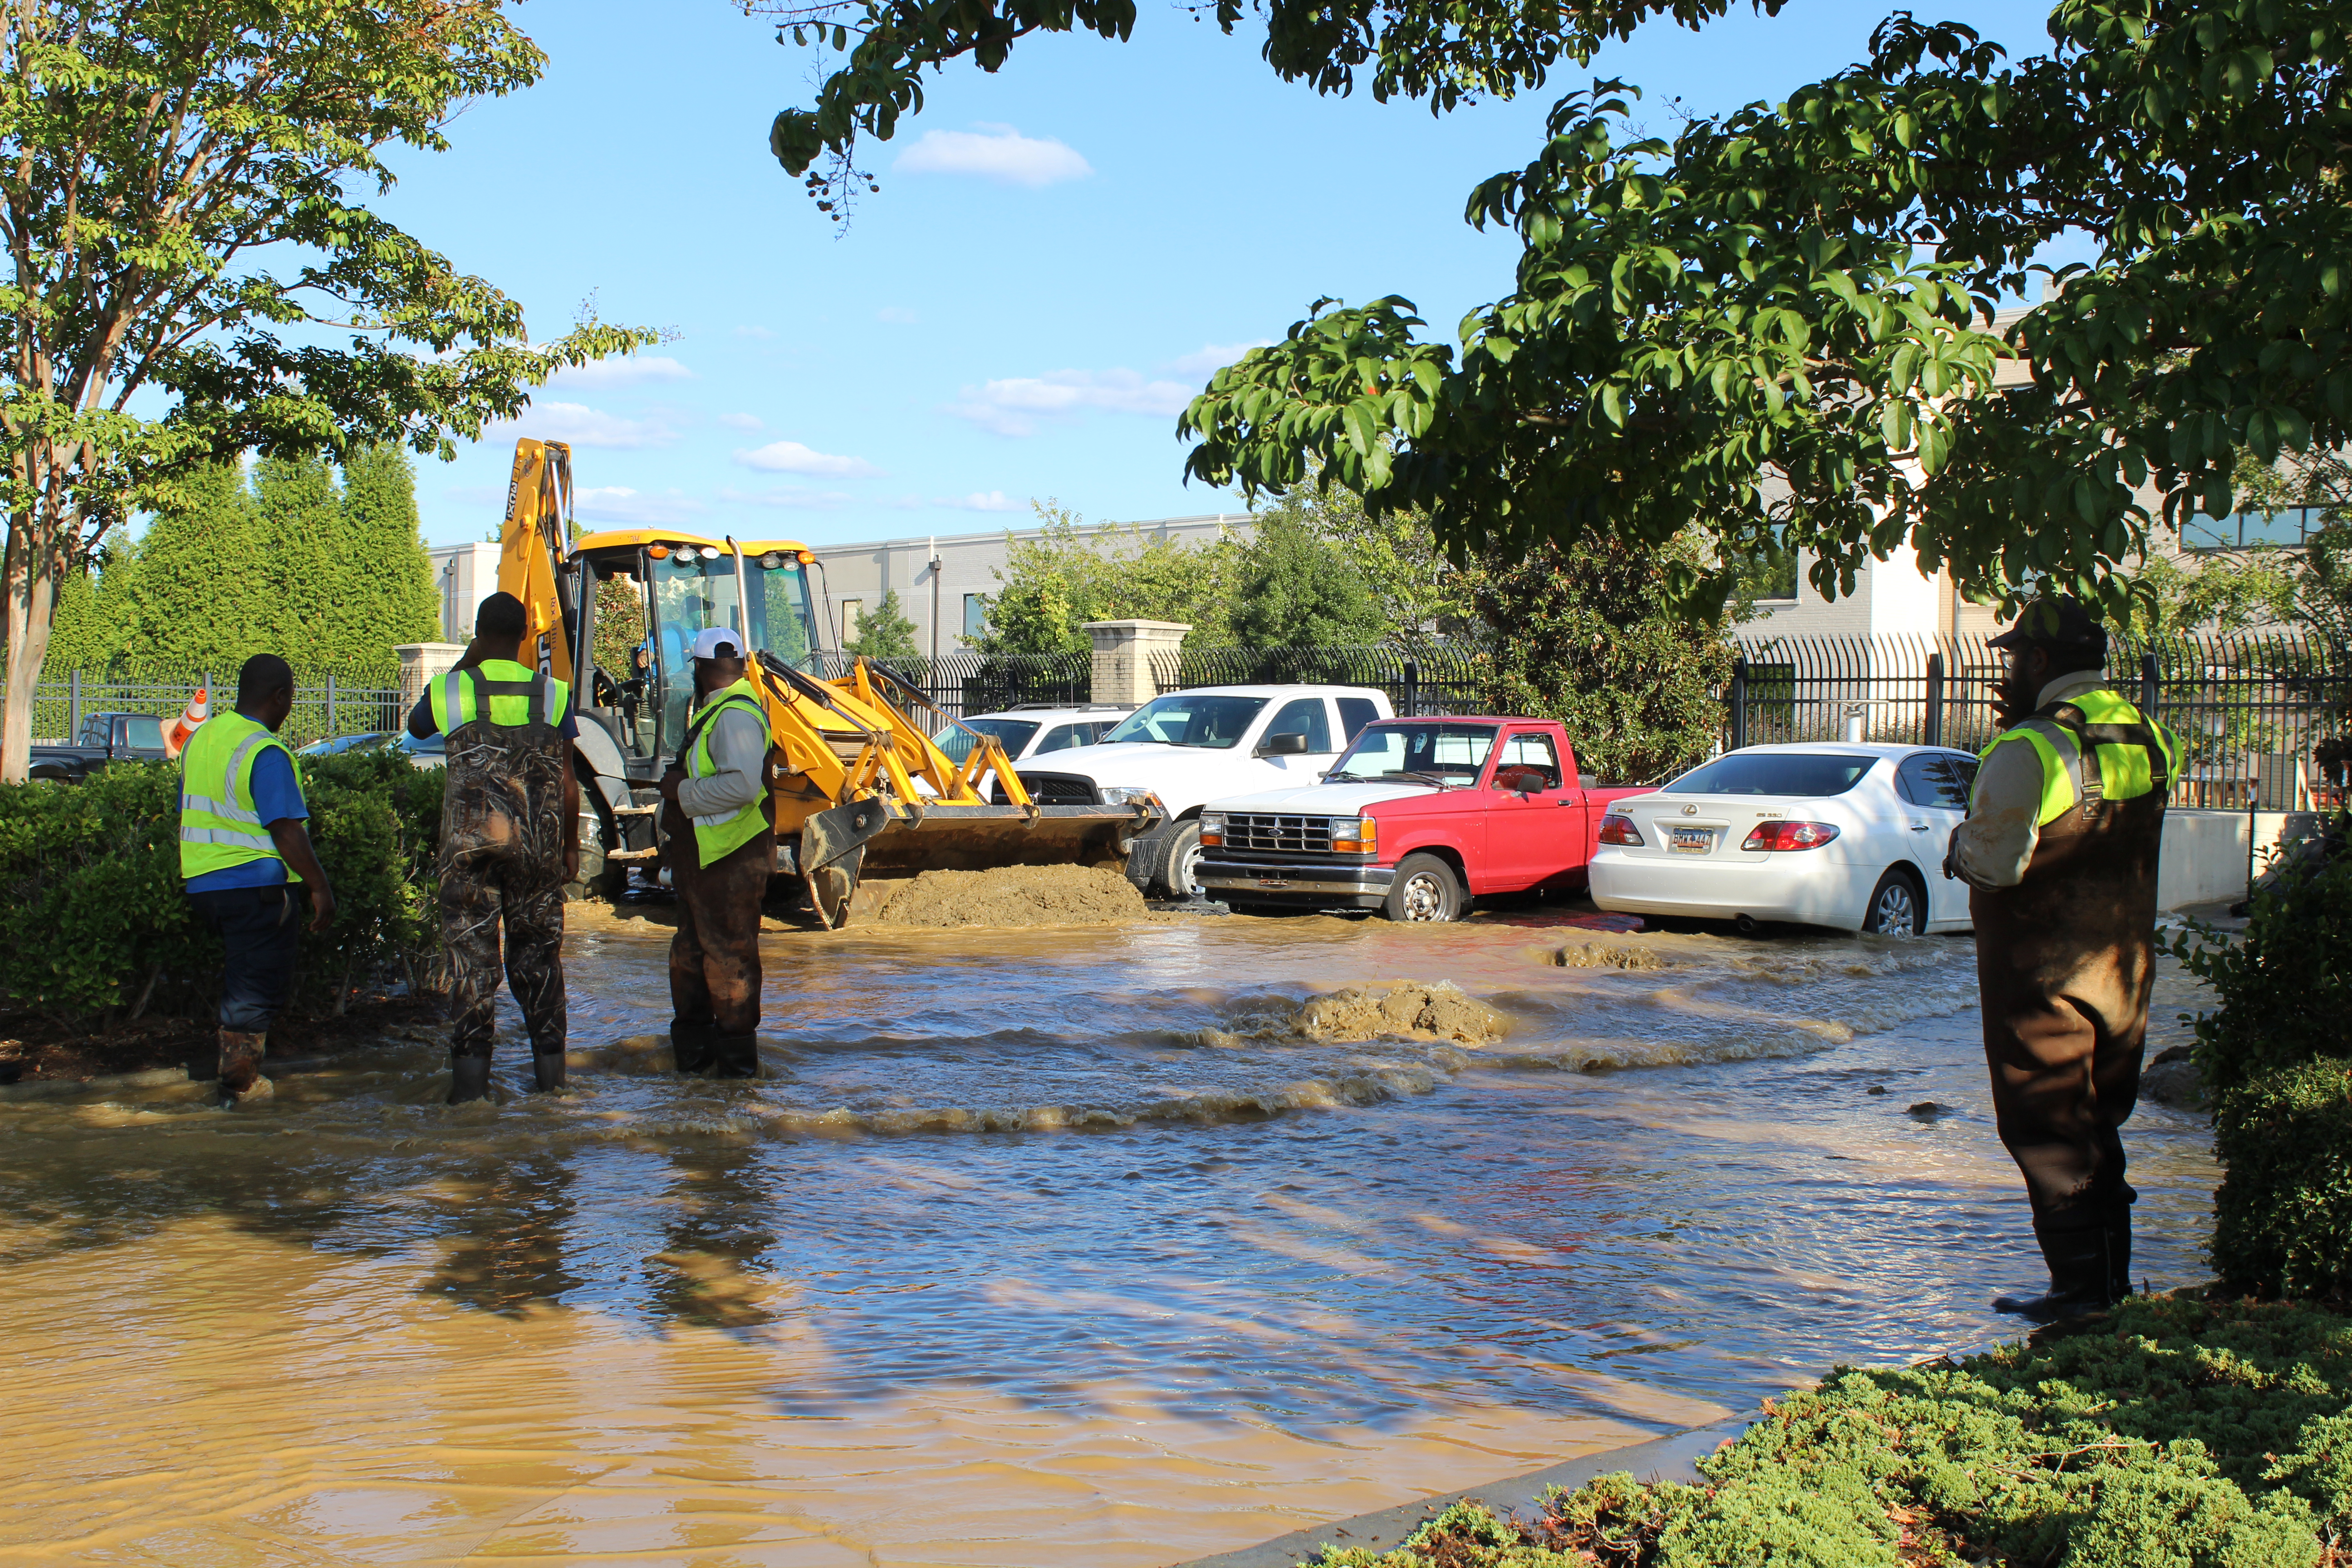 Breaking: City water line bursts leaving Winthrop without water